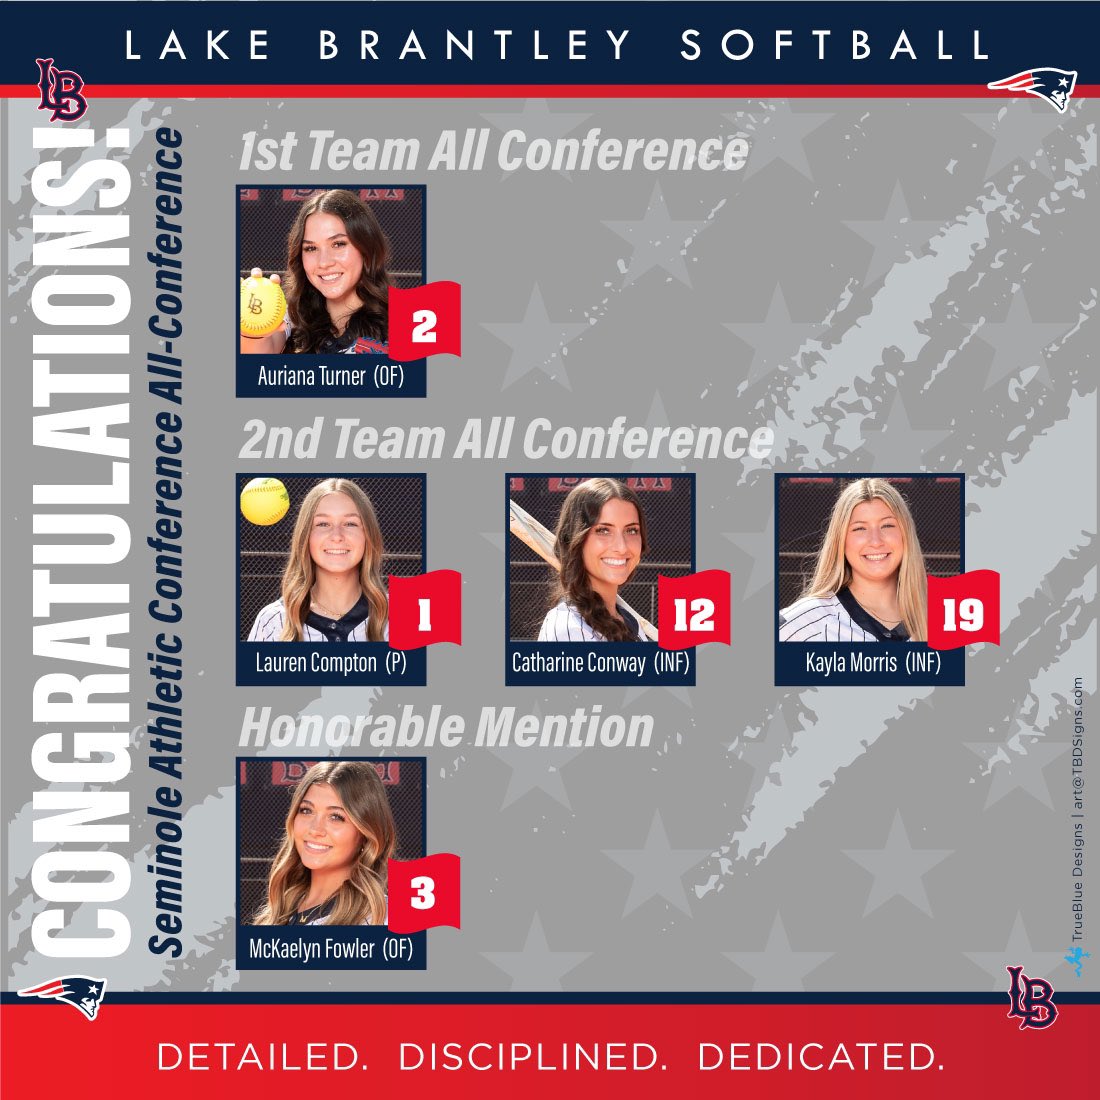 In a season filled with exceptional teamwork and a we before me mindset, a few individuals have stood out. Congratulations to our “All-Conference” selections! #GoPatriots #WhateverItTakes